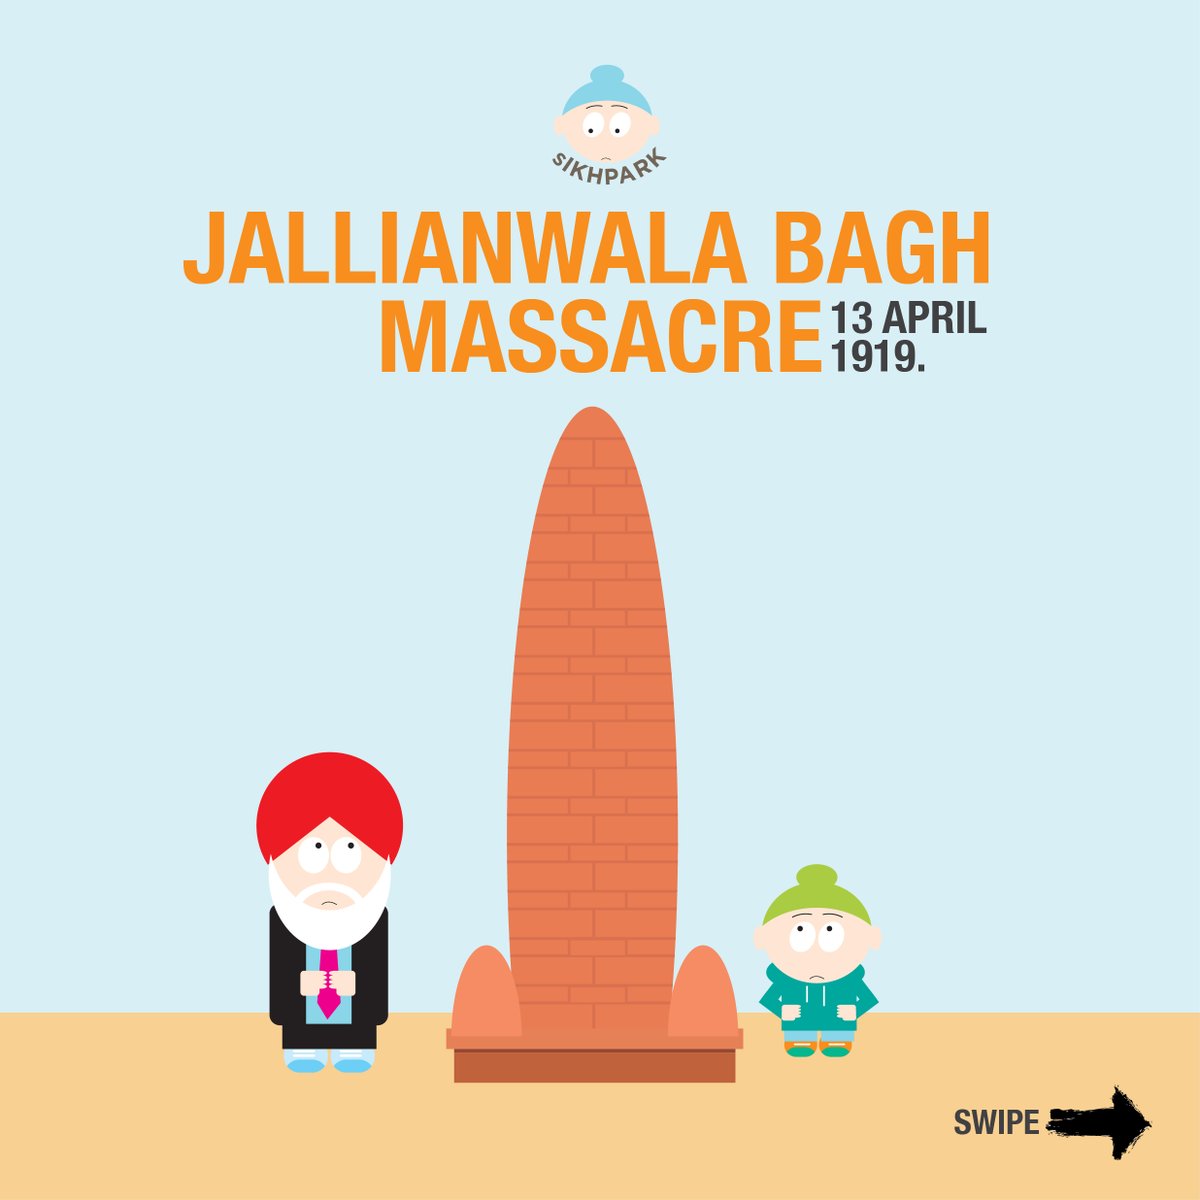 Today marks the anniversary of the #JallianwalaBagh  Bagh massacre, also known as the Amritsar massacre, which occurred on April 13, 1919 on the day of the Vaishakhi. Here's a brief overview. A thread. 🙏

#JallianwalaBaghMassacre